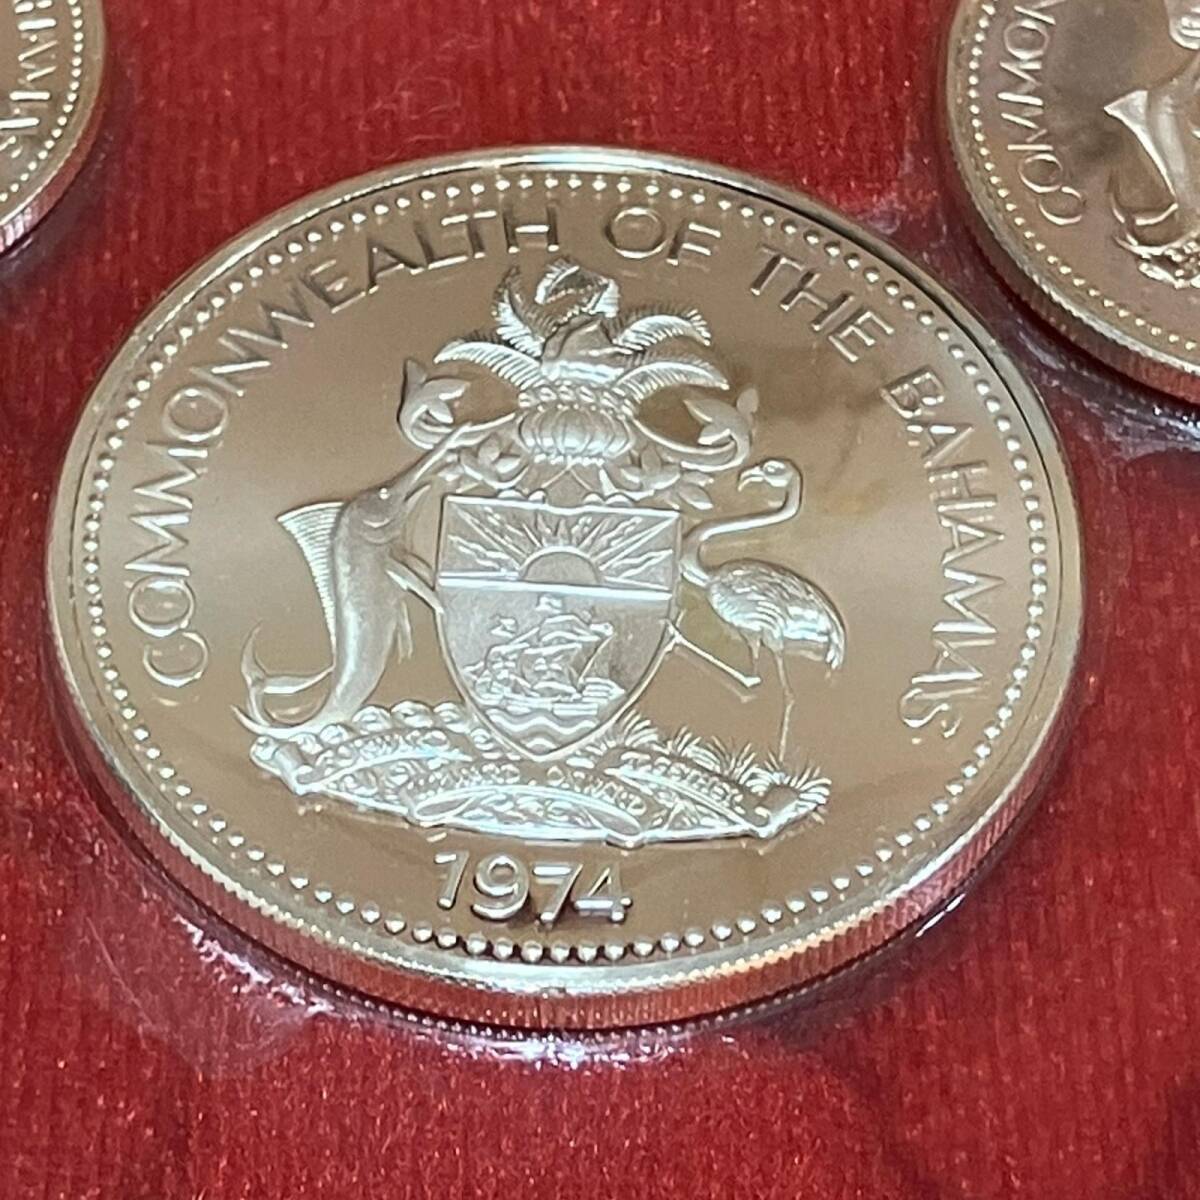 COMMONWEALTH OF THE BAHAMAS PROOF SET MINTED AT THE FRANKLIN MINT バハマ フランクリンミント プルーフ貨幣セット 1974年 コインの画像7